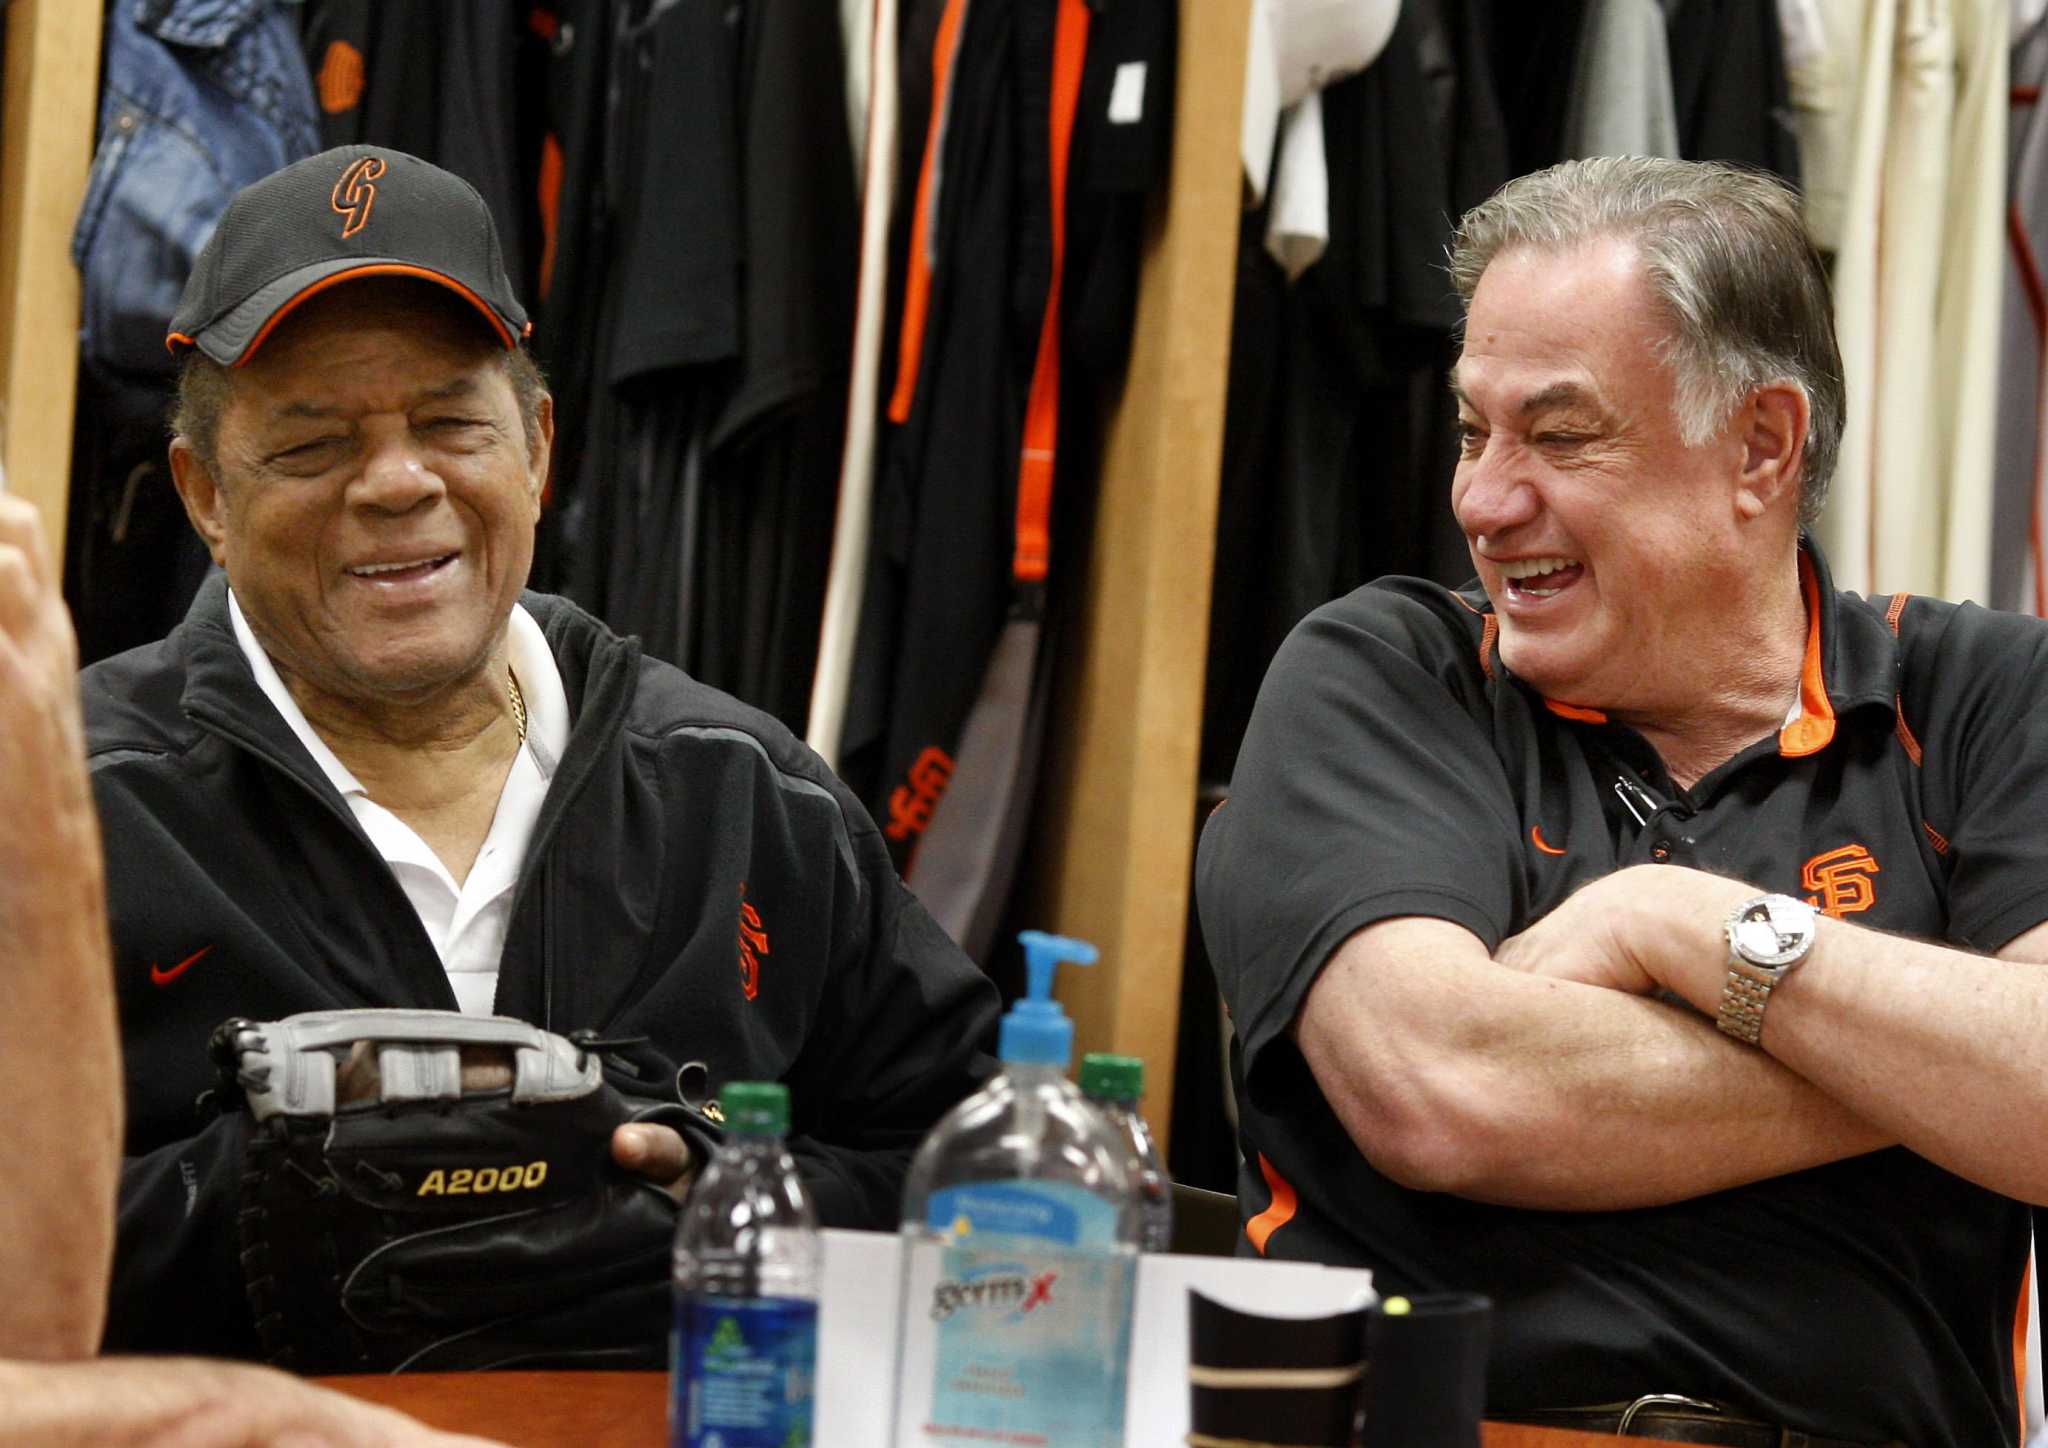 Giants clubhouse legend Mike Murphy retires after 65 years on the job